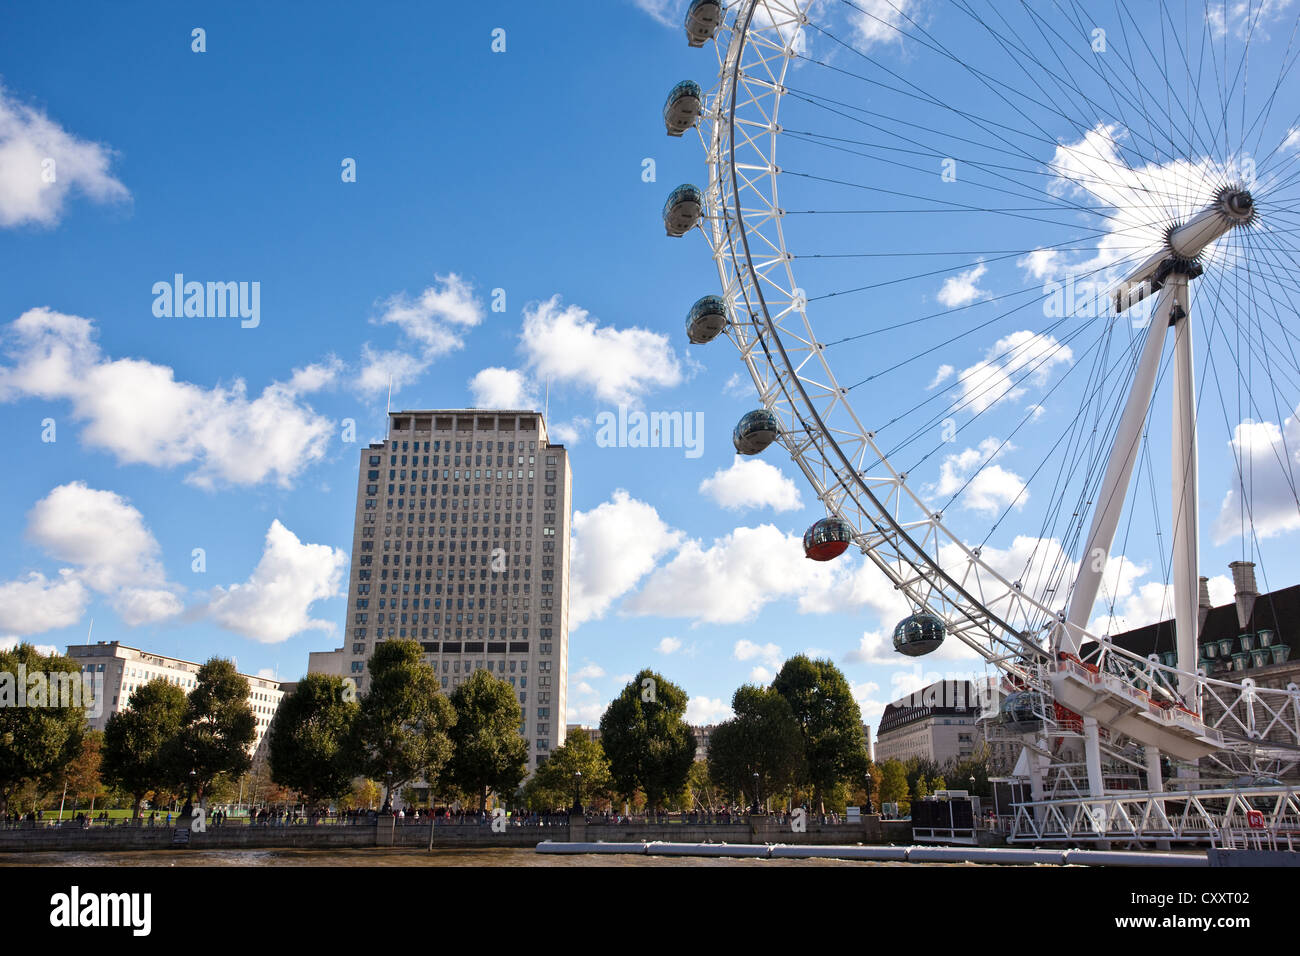 The Shell Centre building stands behind the London Eye on the Southbank of Thames River, London, England, UK Stock Photo